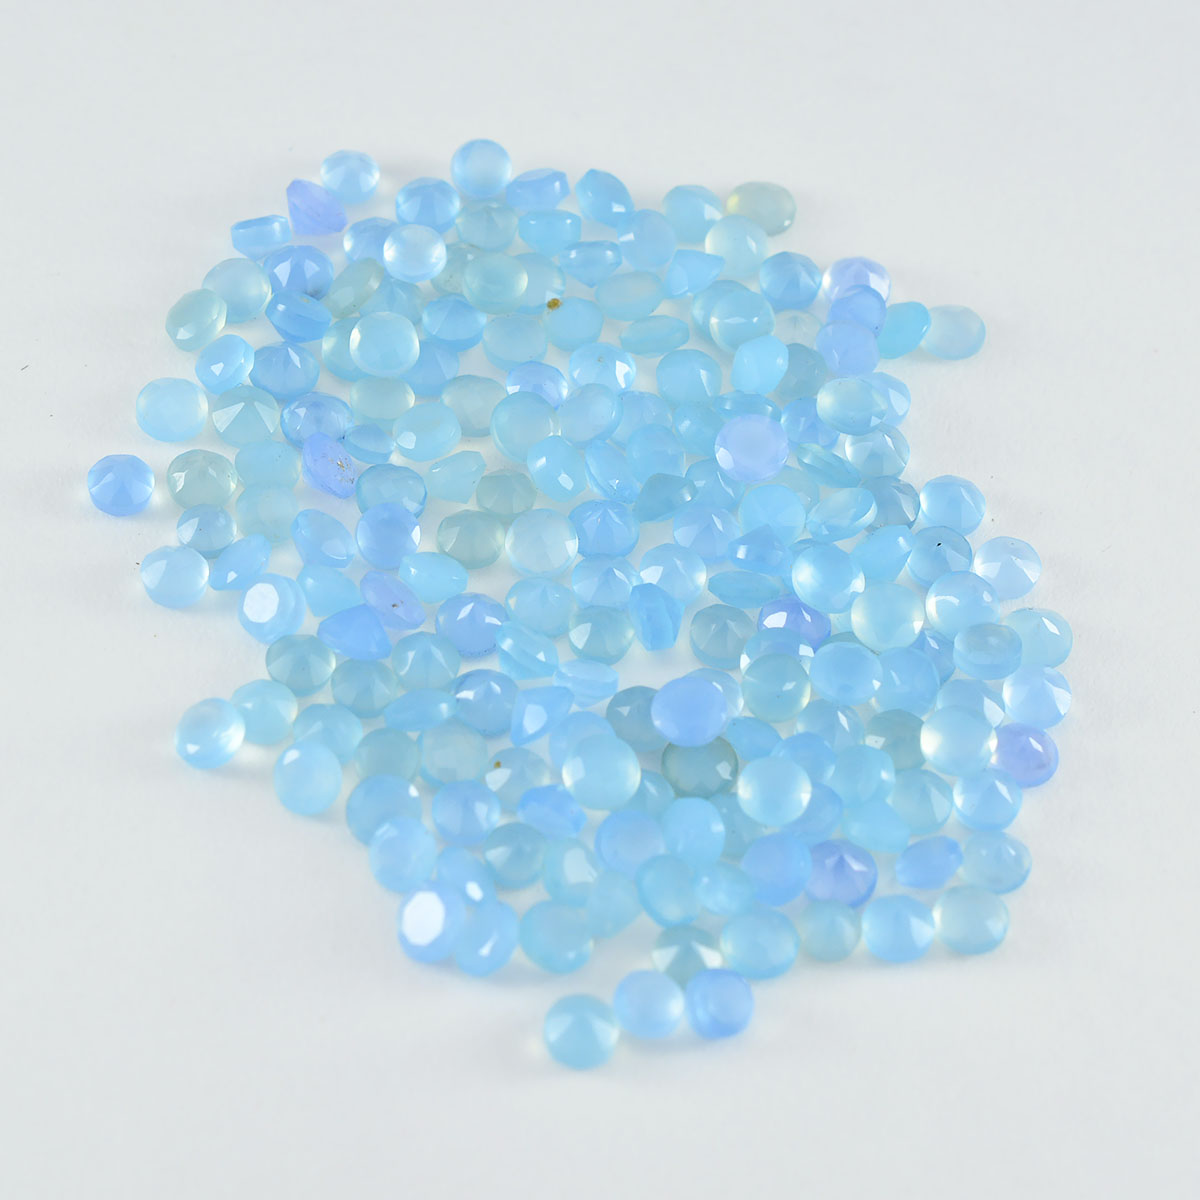 Riyogems 1PC Genuine Blue Chalcedony Faceted 2x2 mm Round Shape handsome Quality Loose Gems